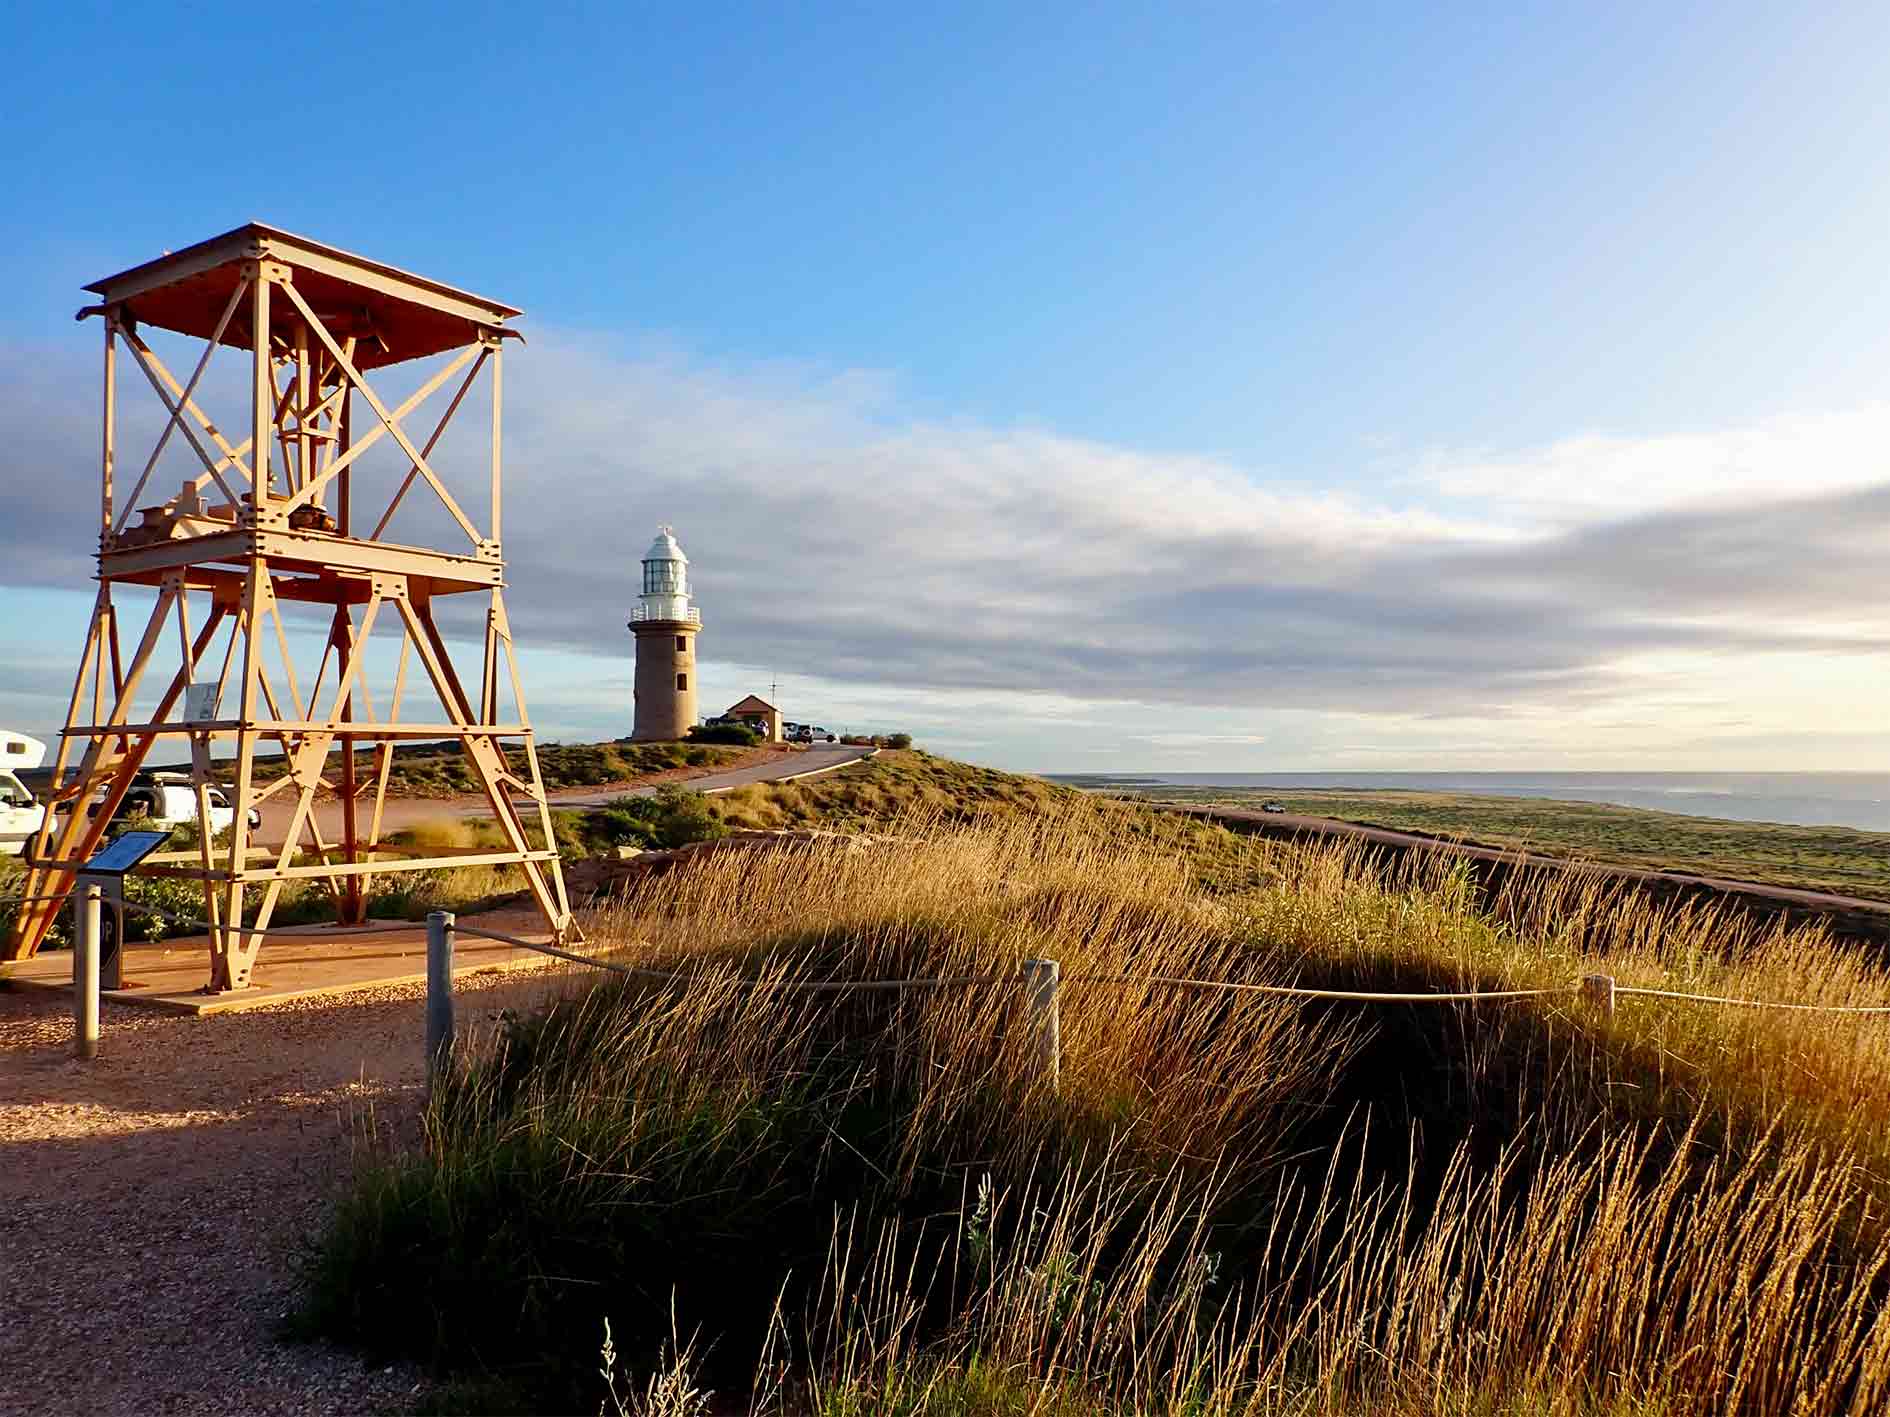 Visit Vlamingh Head Lighthouse, learn about Exmouth's WWII history, spot whales in season